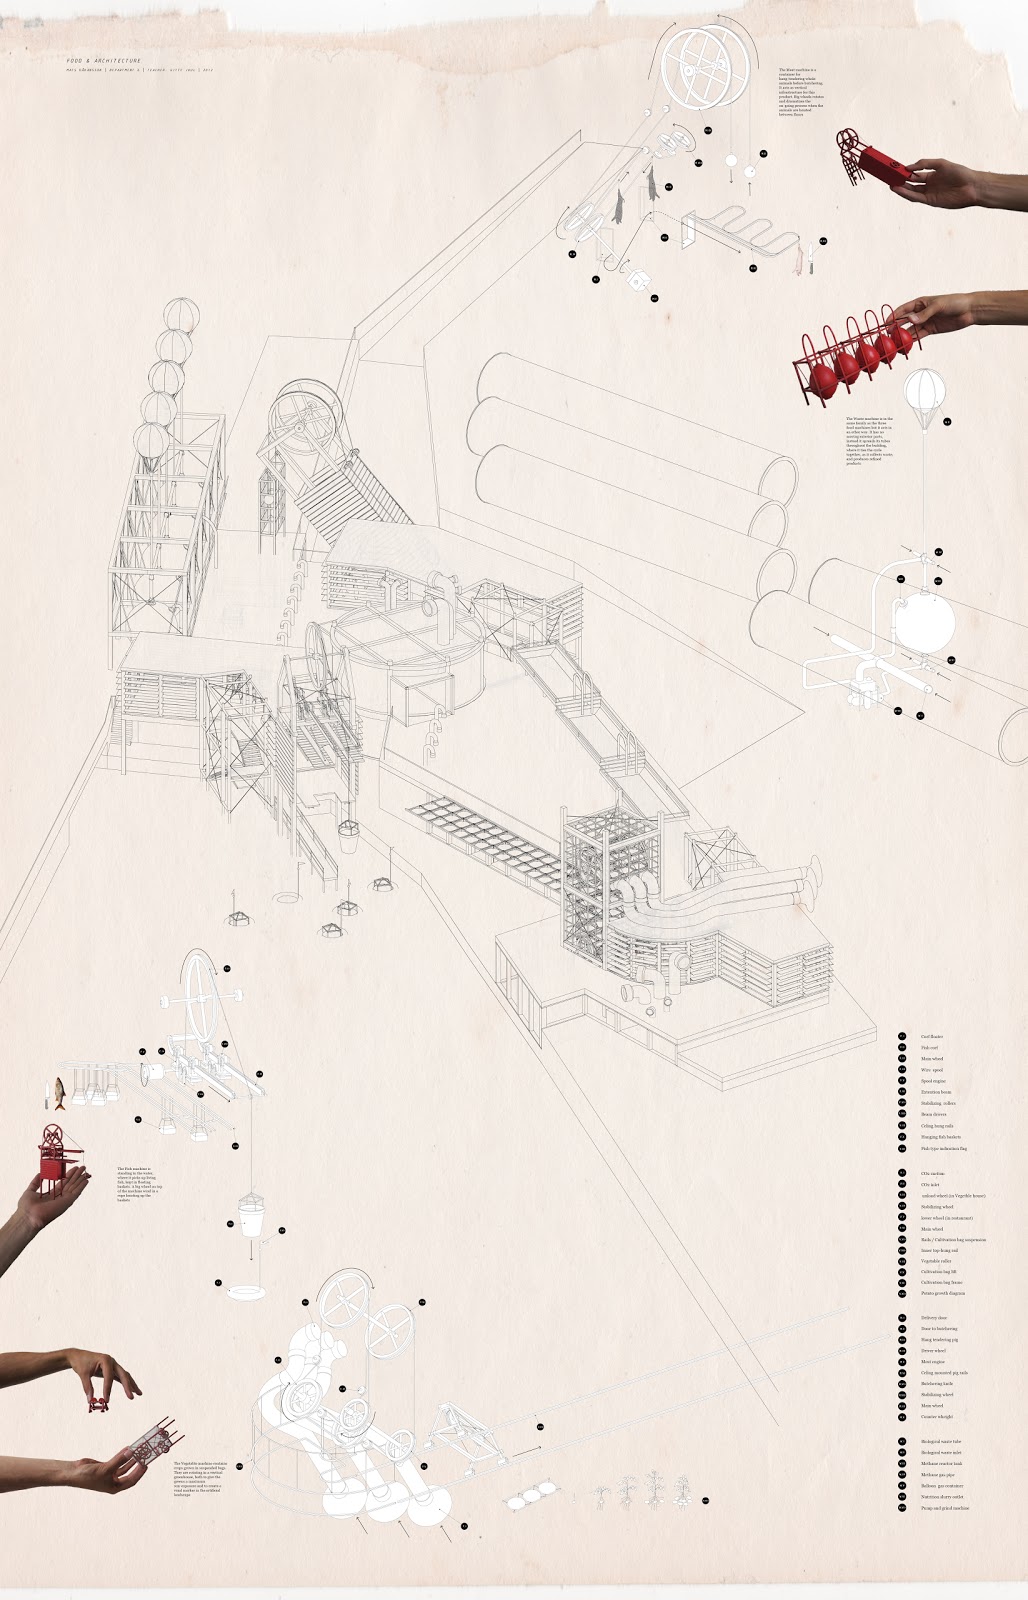 Sci arc thesis 2012